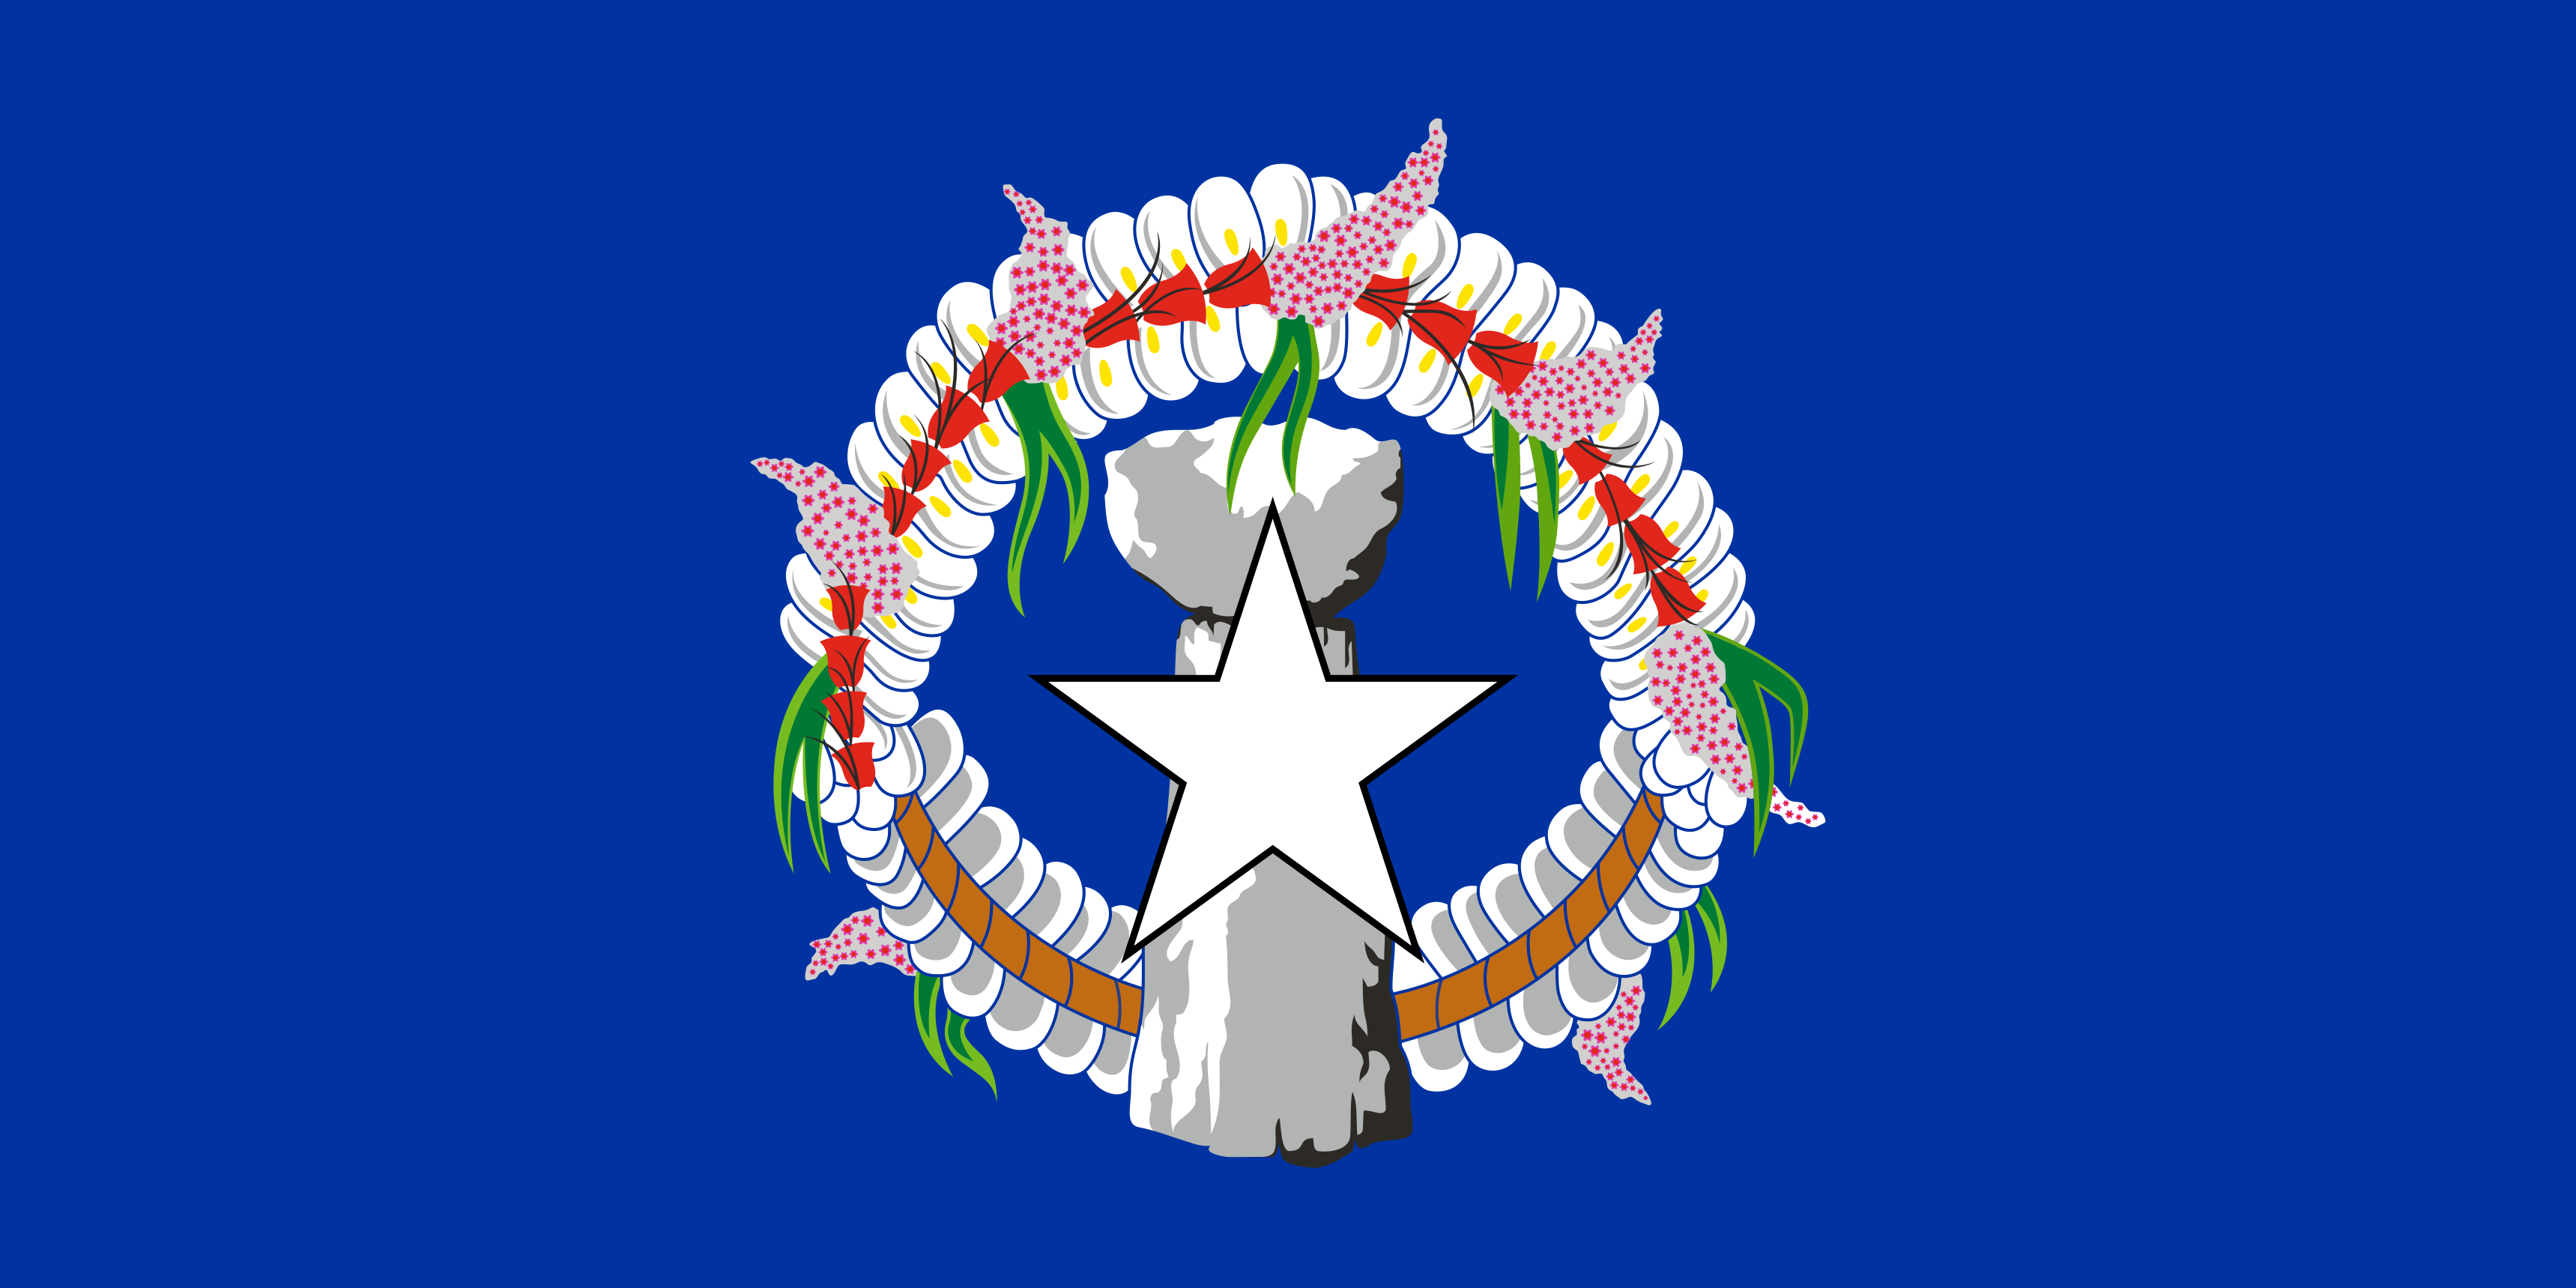 Free Northern Mariana Islands Flag Documents: PDF, DOC, DOCX, HTML & More!